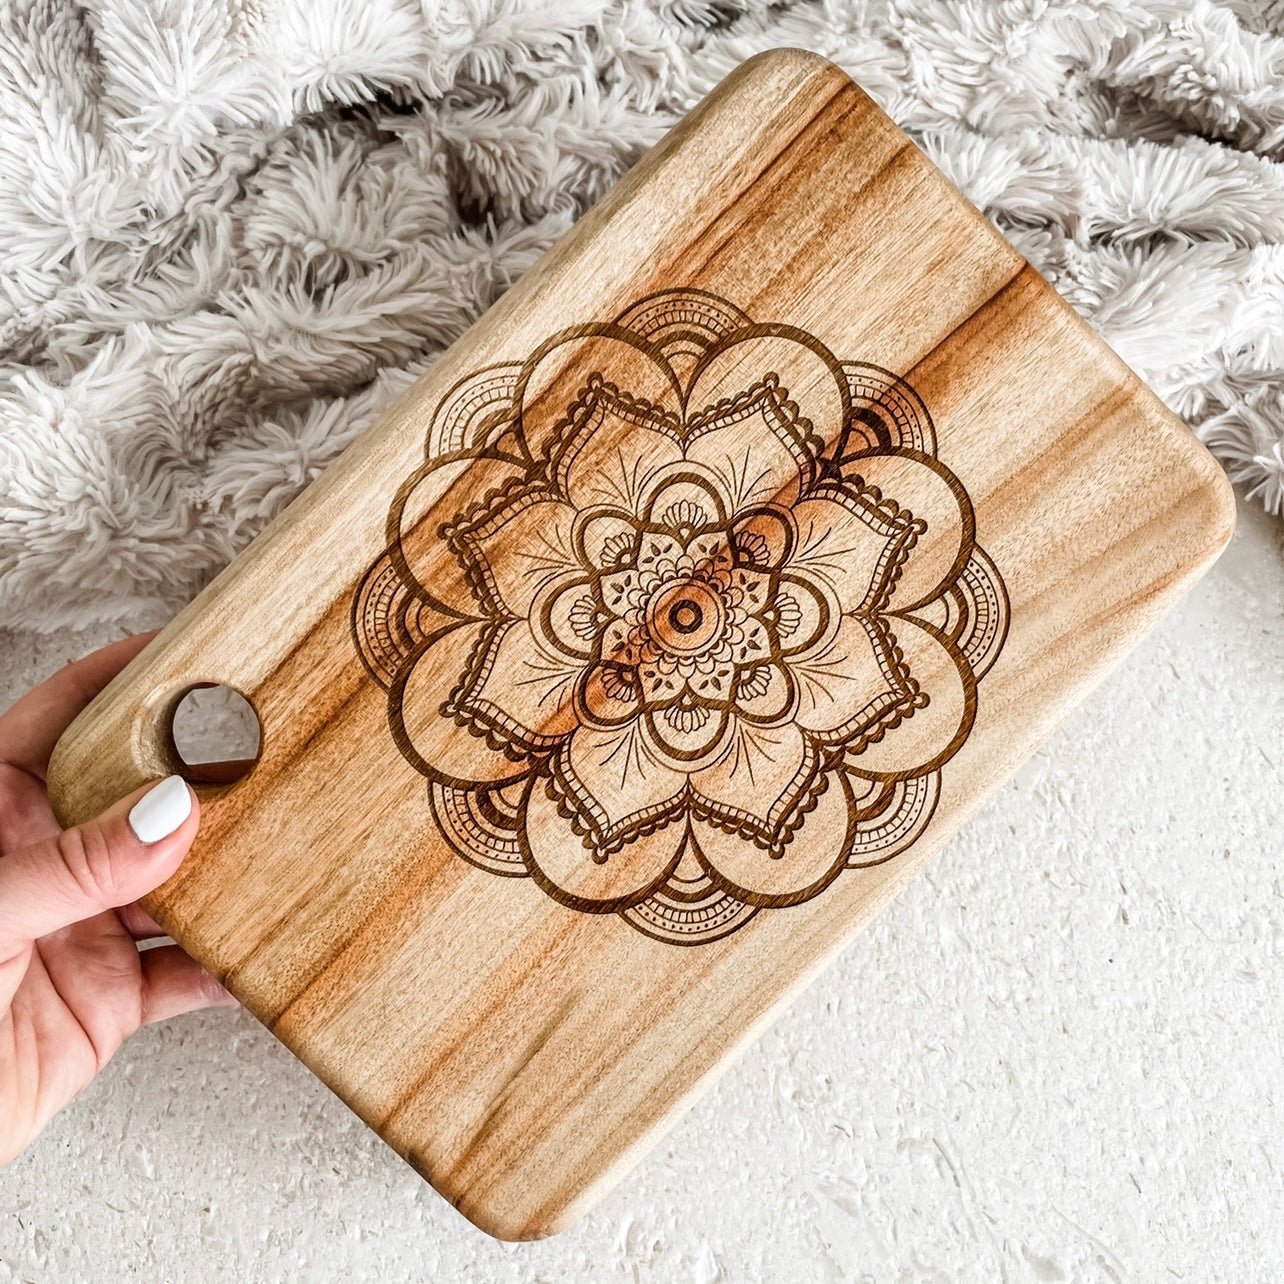 Serving boards - The Humble Gift Co.